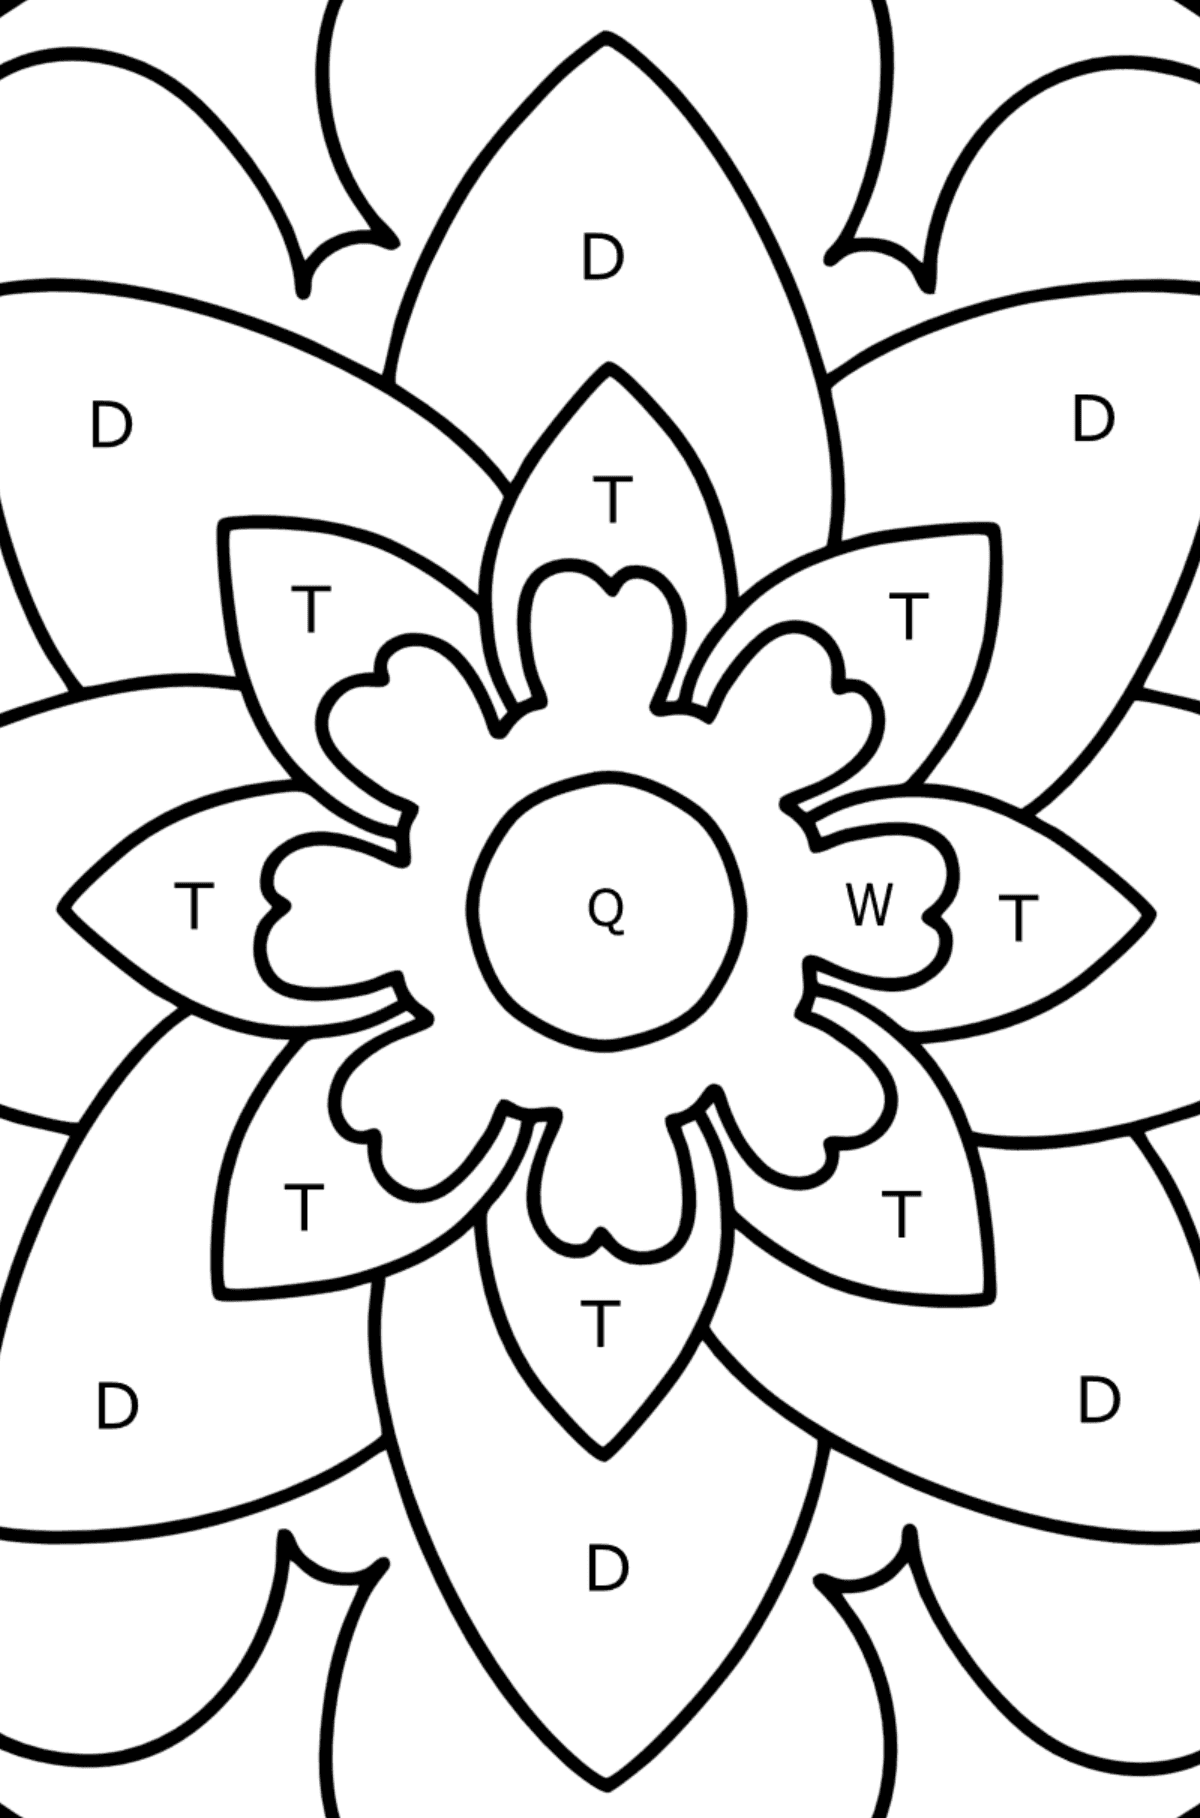 Mandala coloring page - 20 elements - Coloring by Letters for Kids